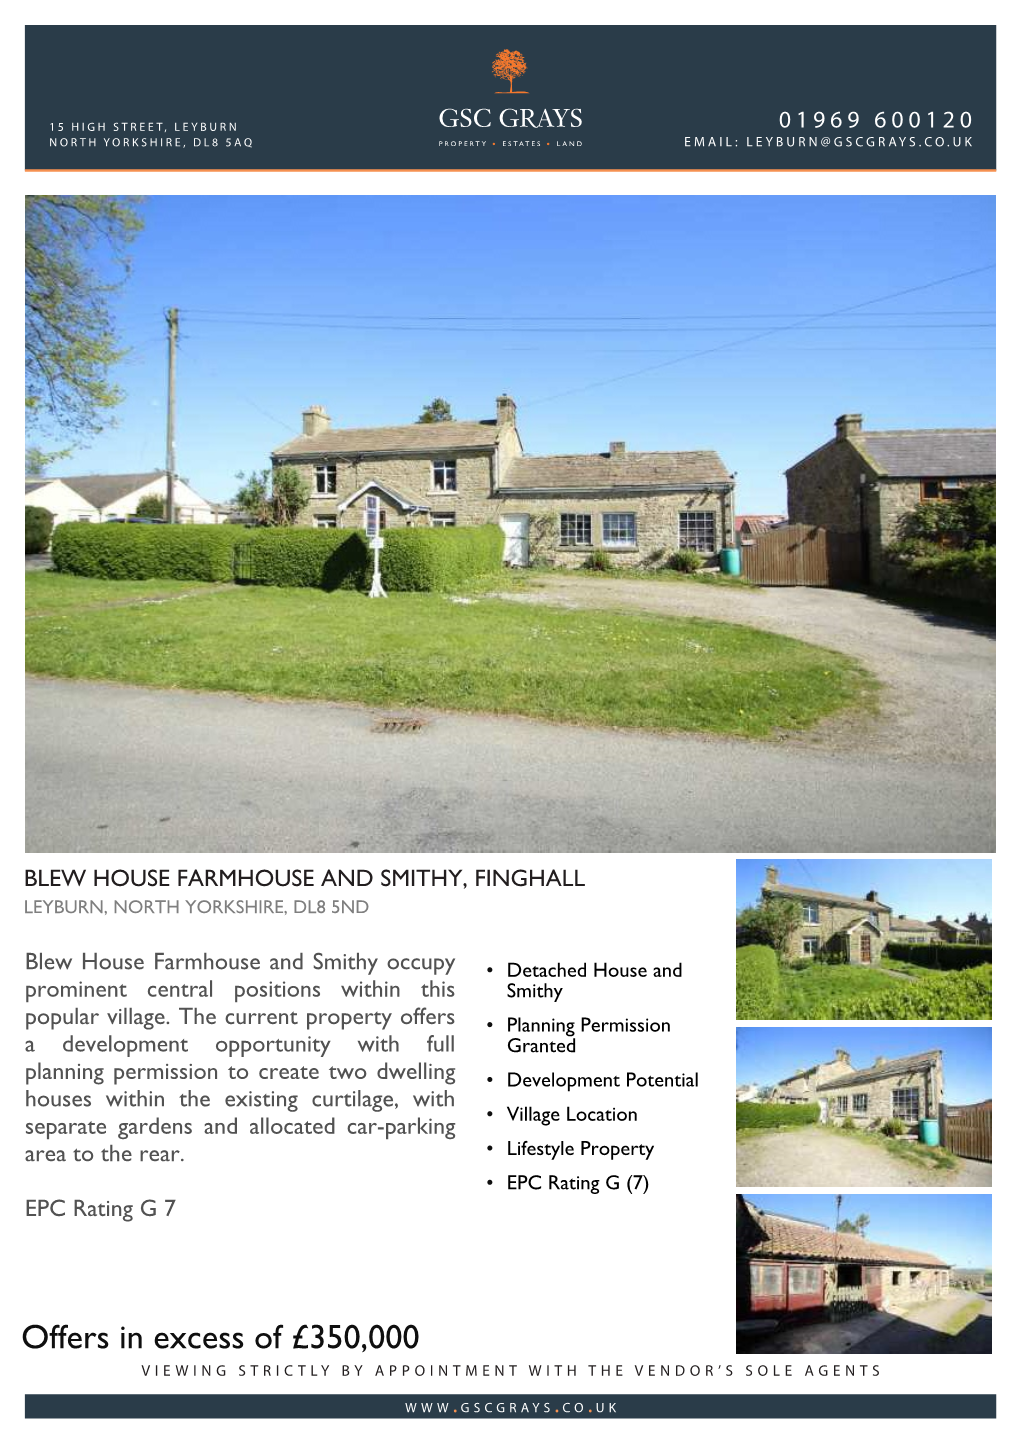 Offers in Excess of £350,000 Viewing Strictly by Appointment with the Vendor’S Sole Agents